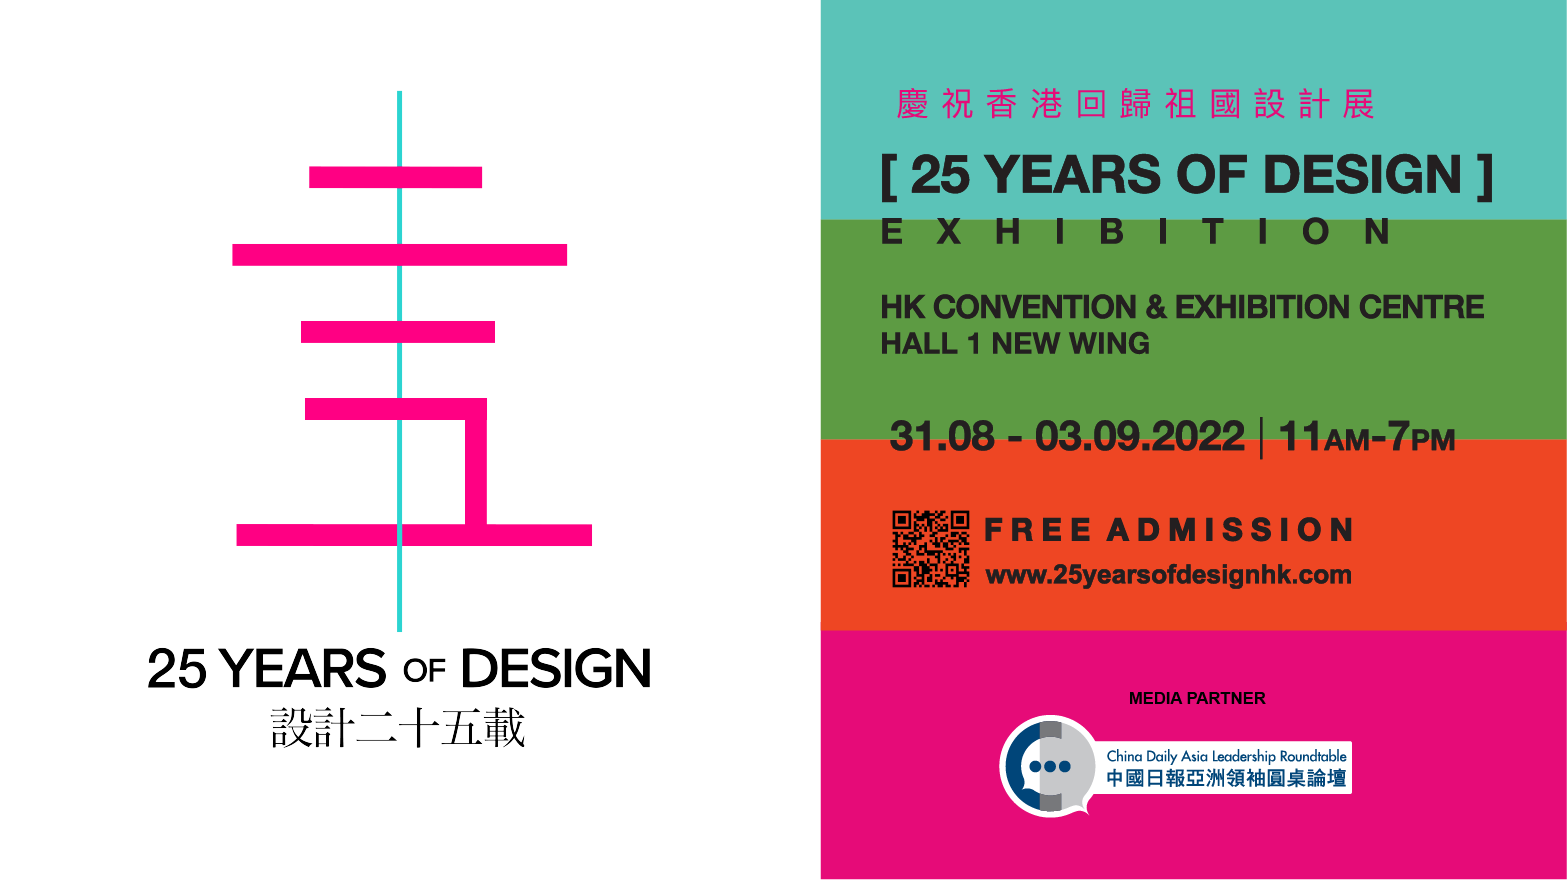 25 Years of Design Exhibition